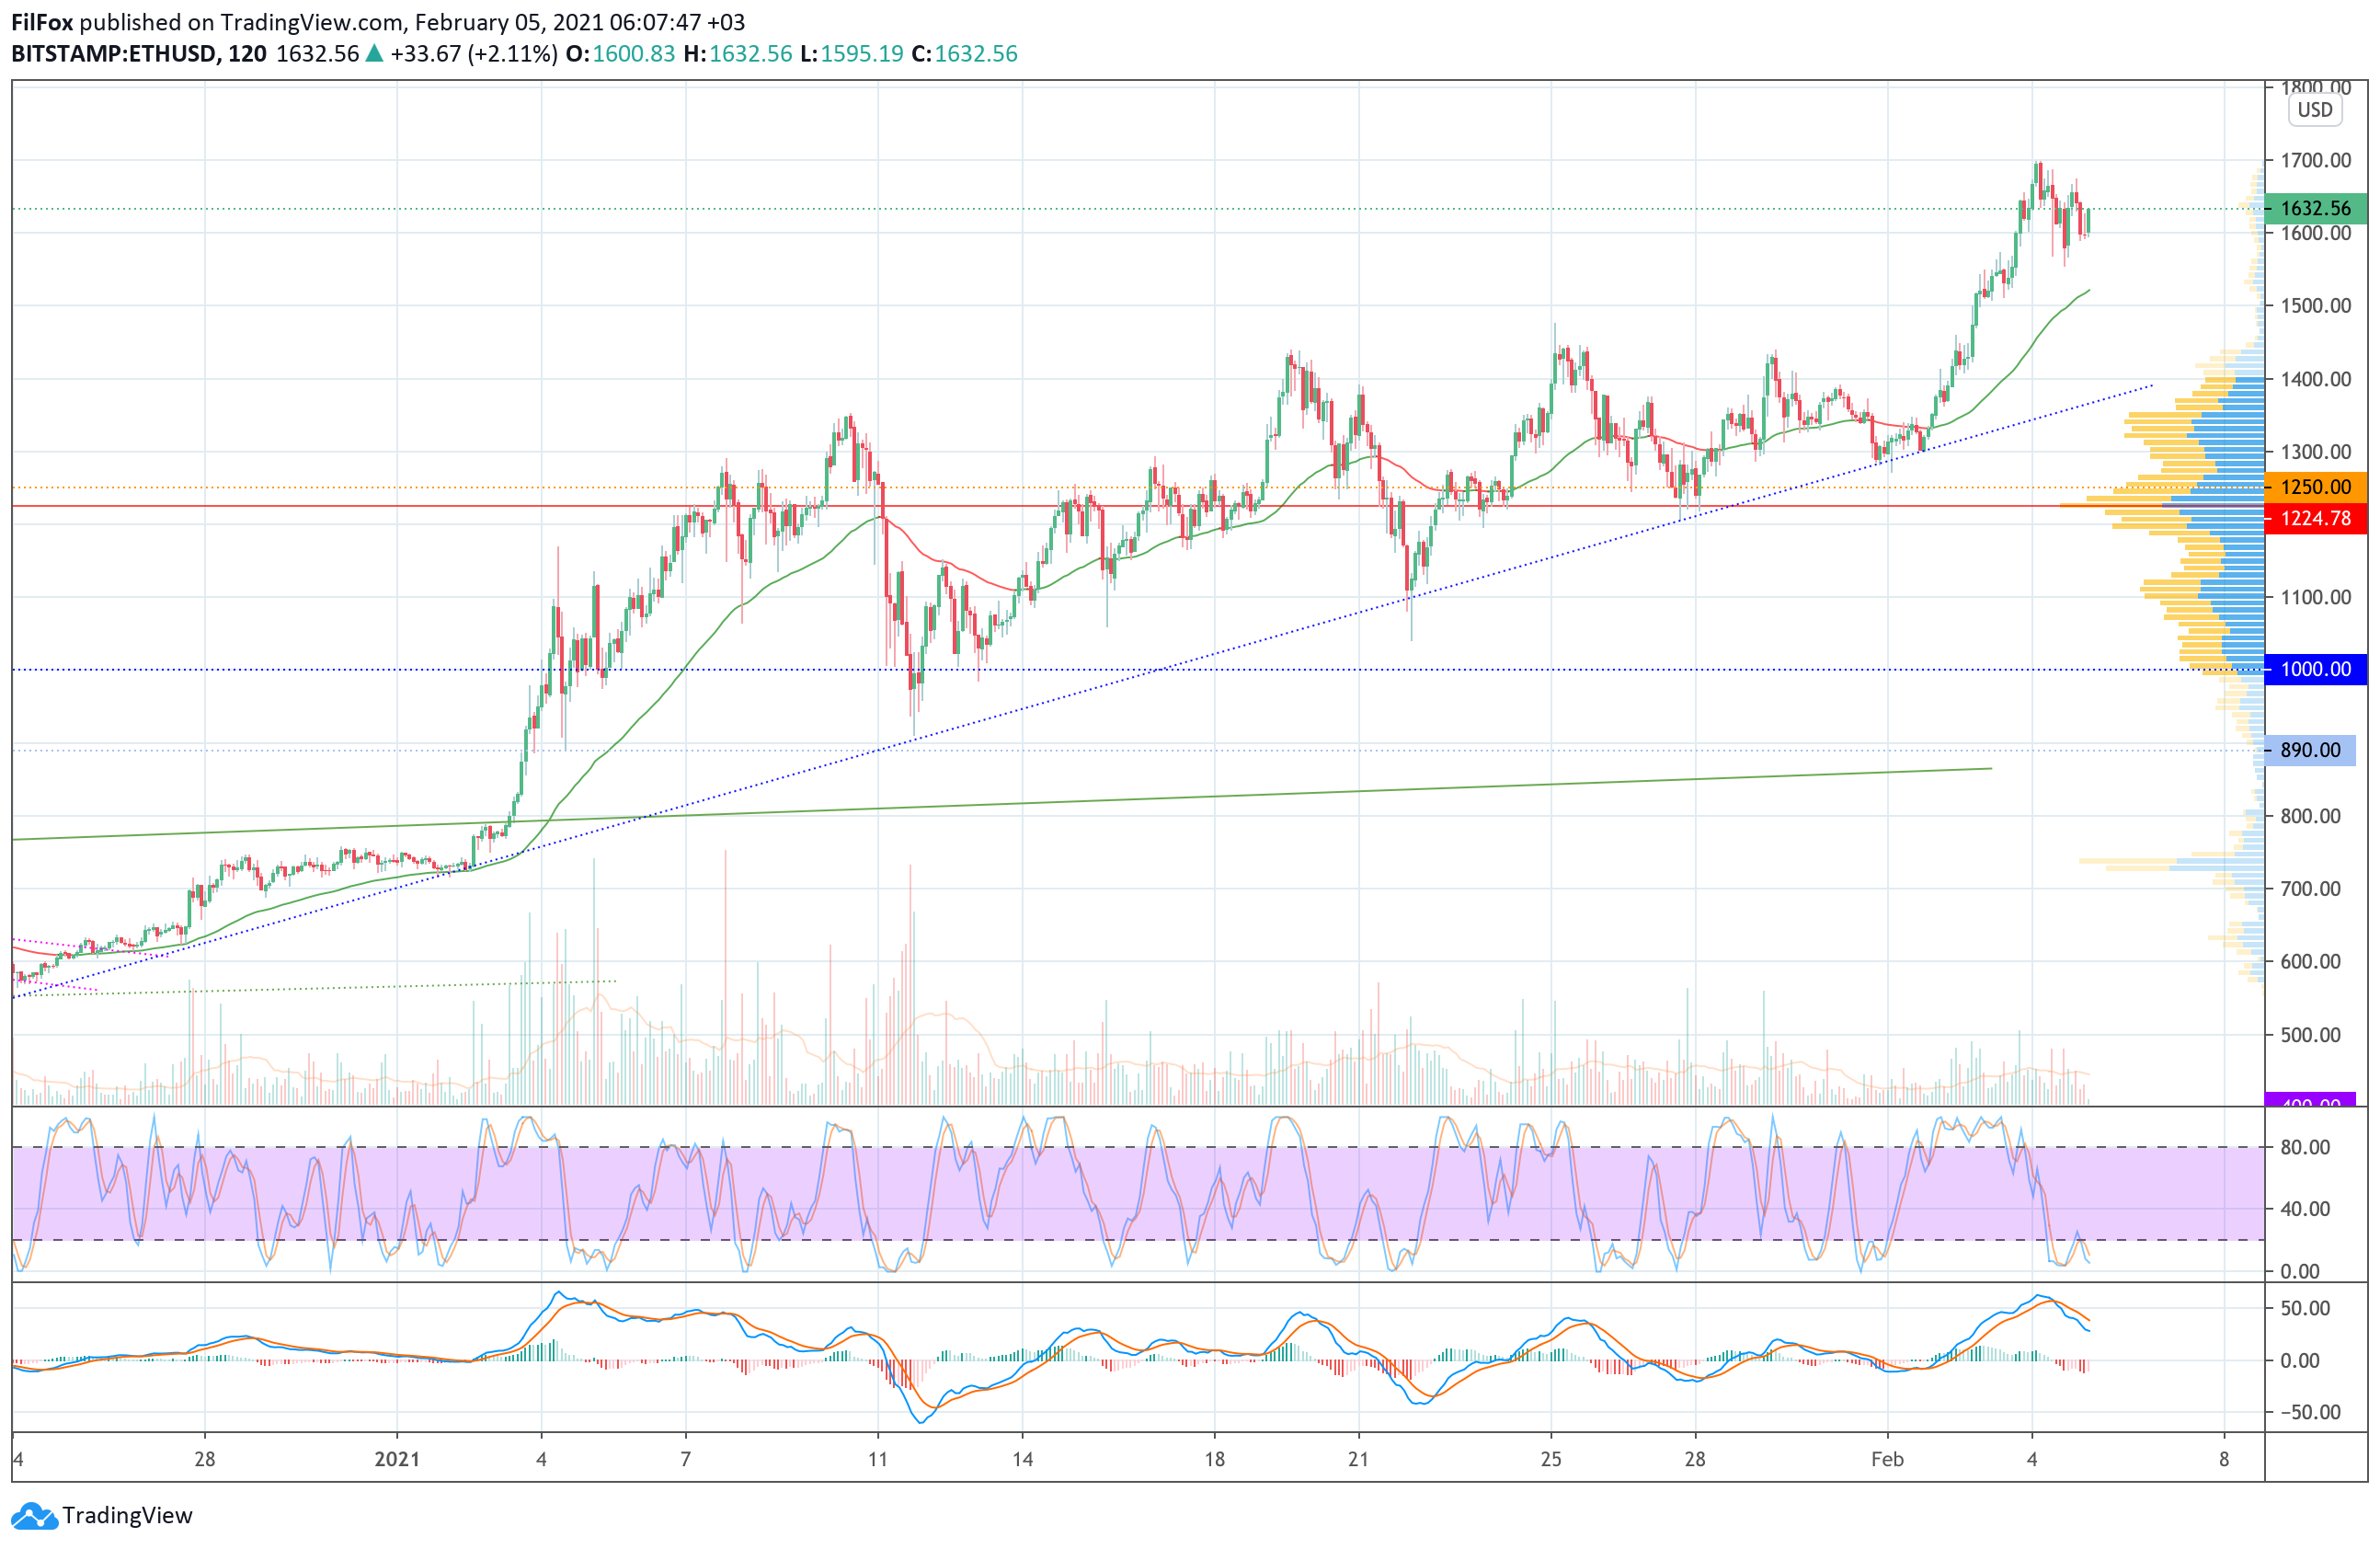 Analysis of prices for Bitcoin, Ethereum, Ripple for 02/05/2021